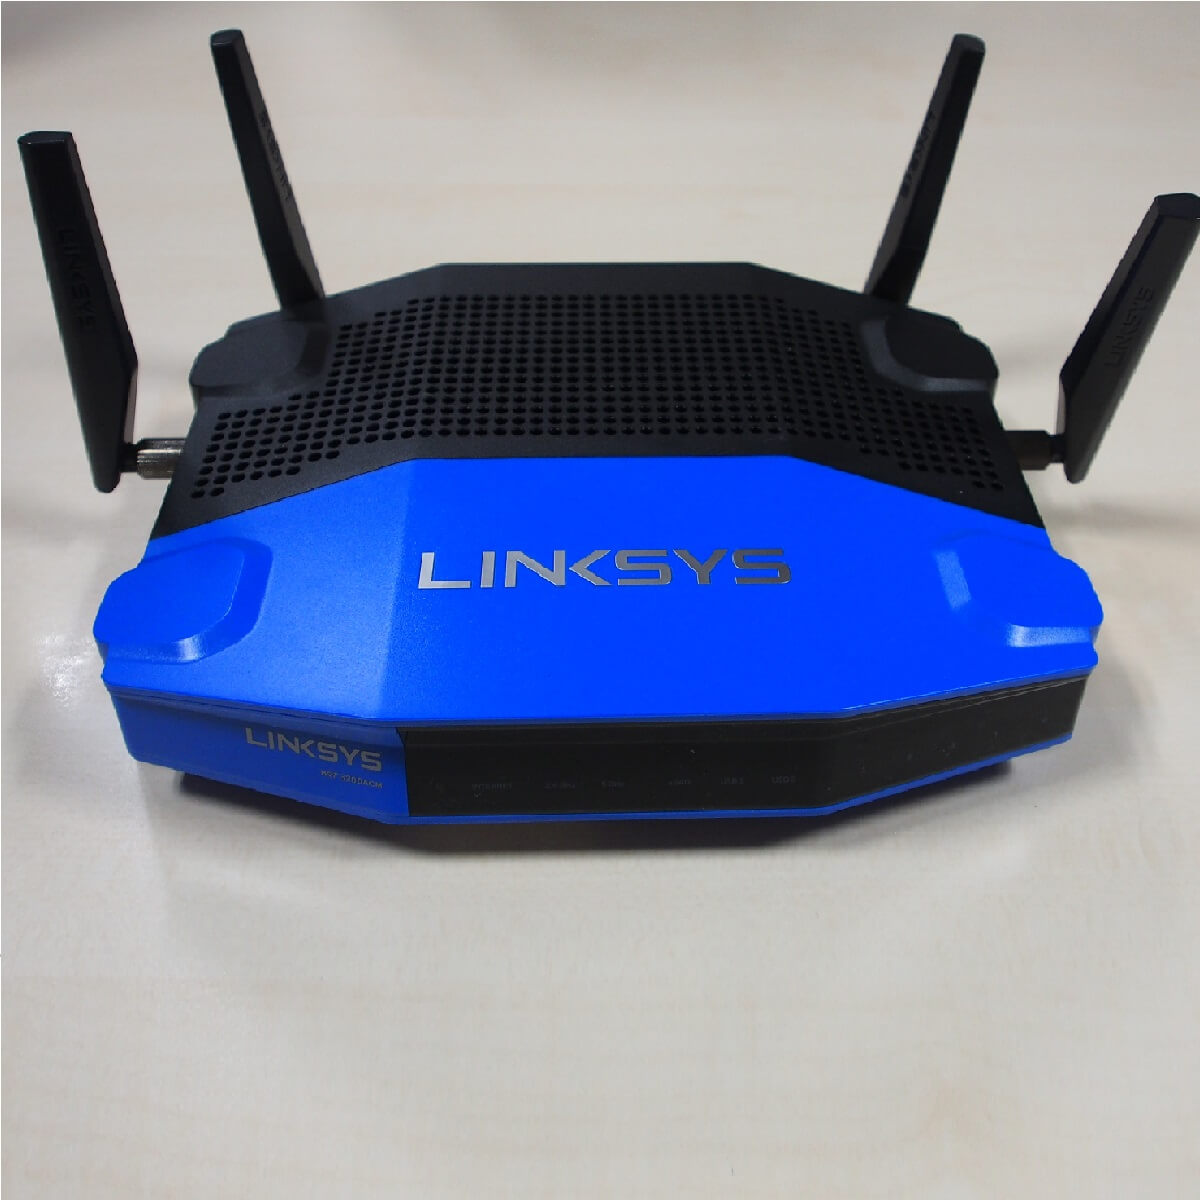 fix Linksys router not showing all devices